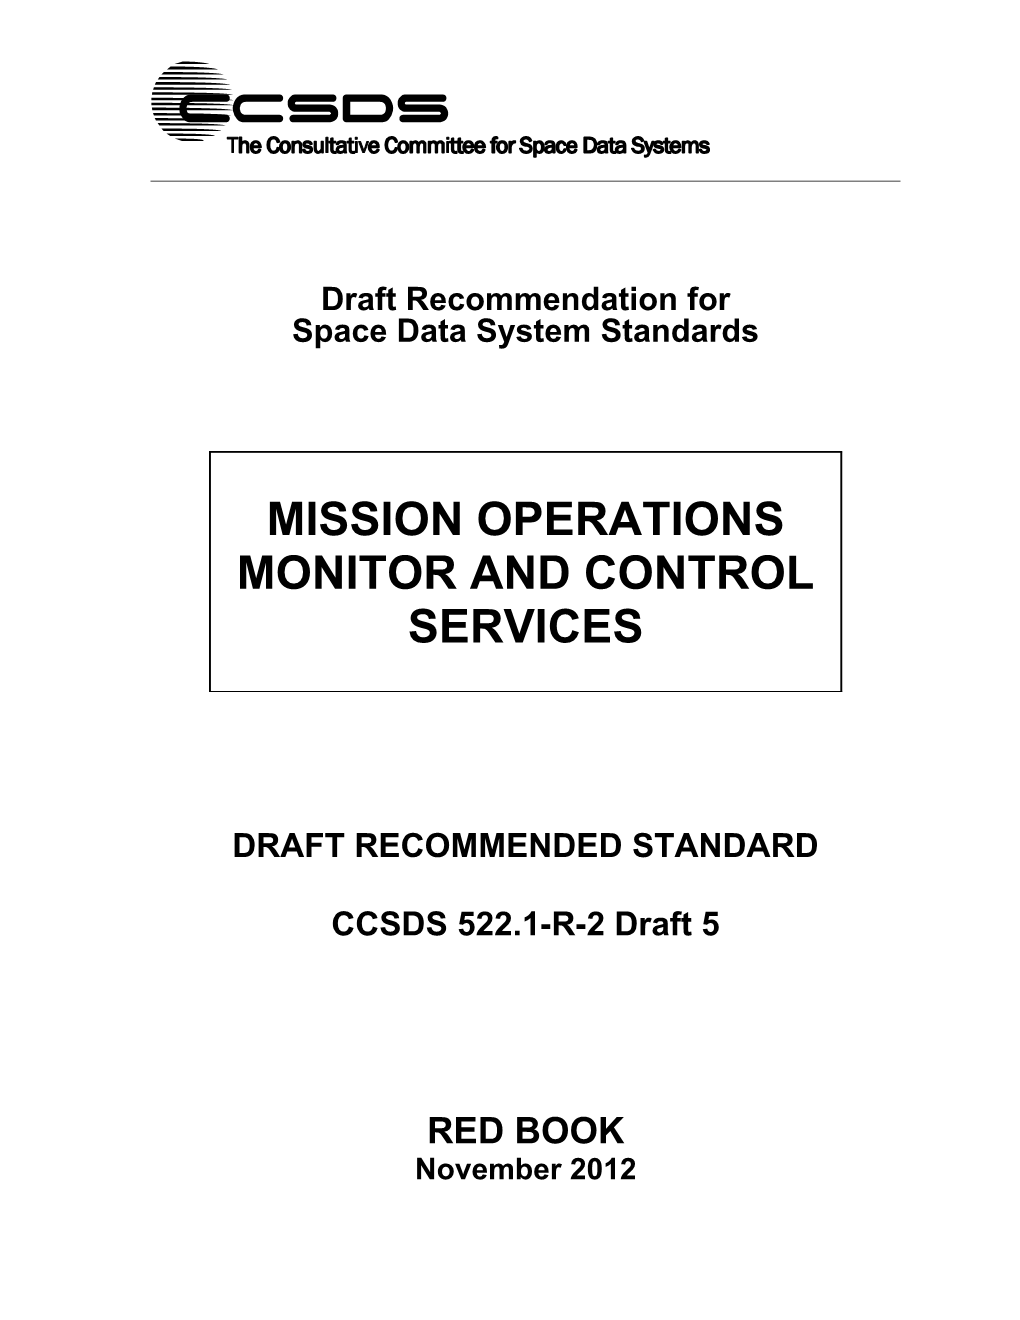 Mission Operations Monitor and Control Services